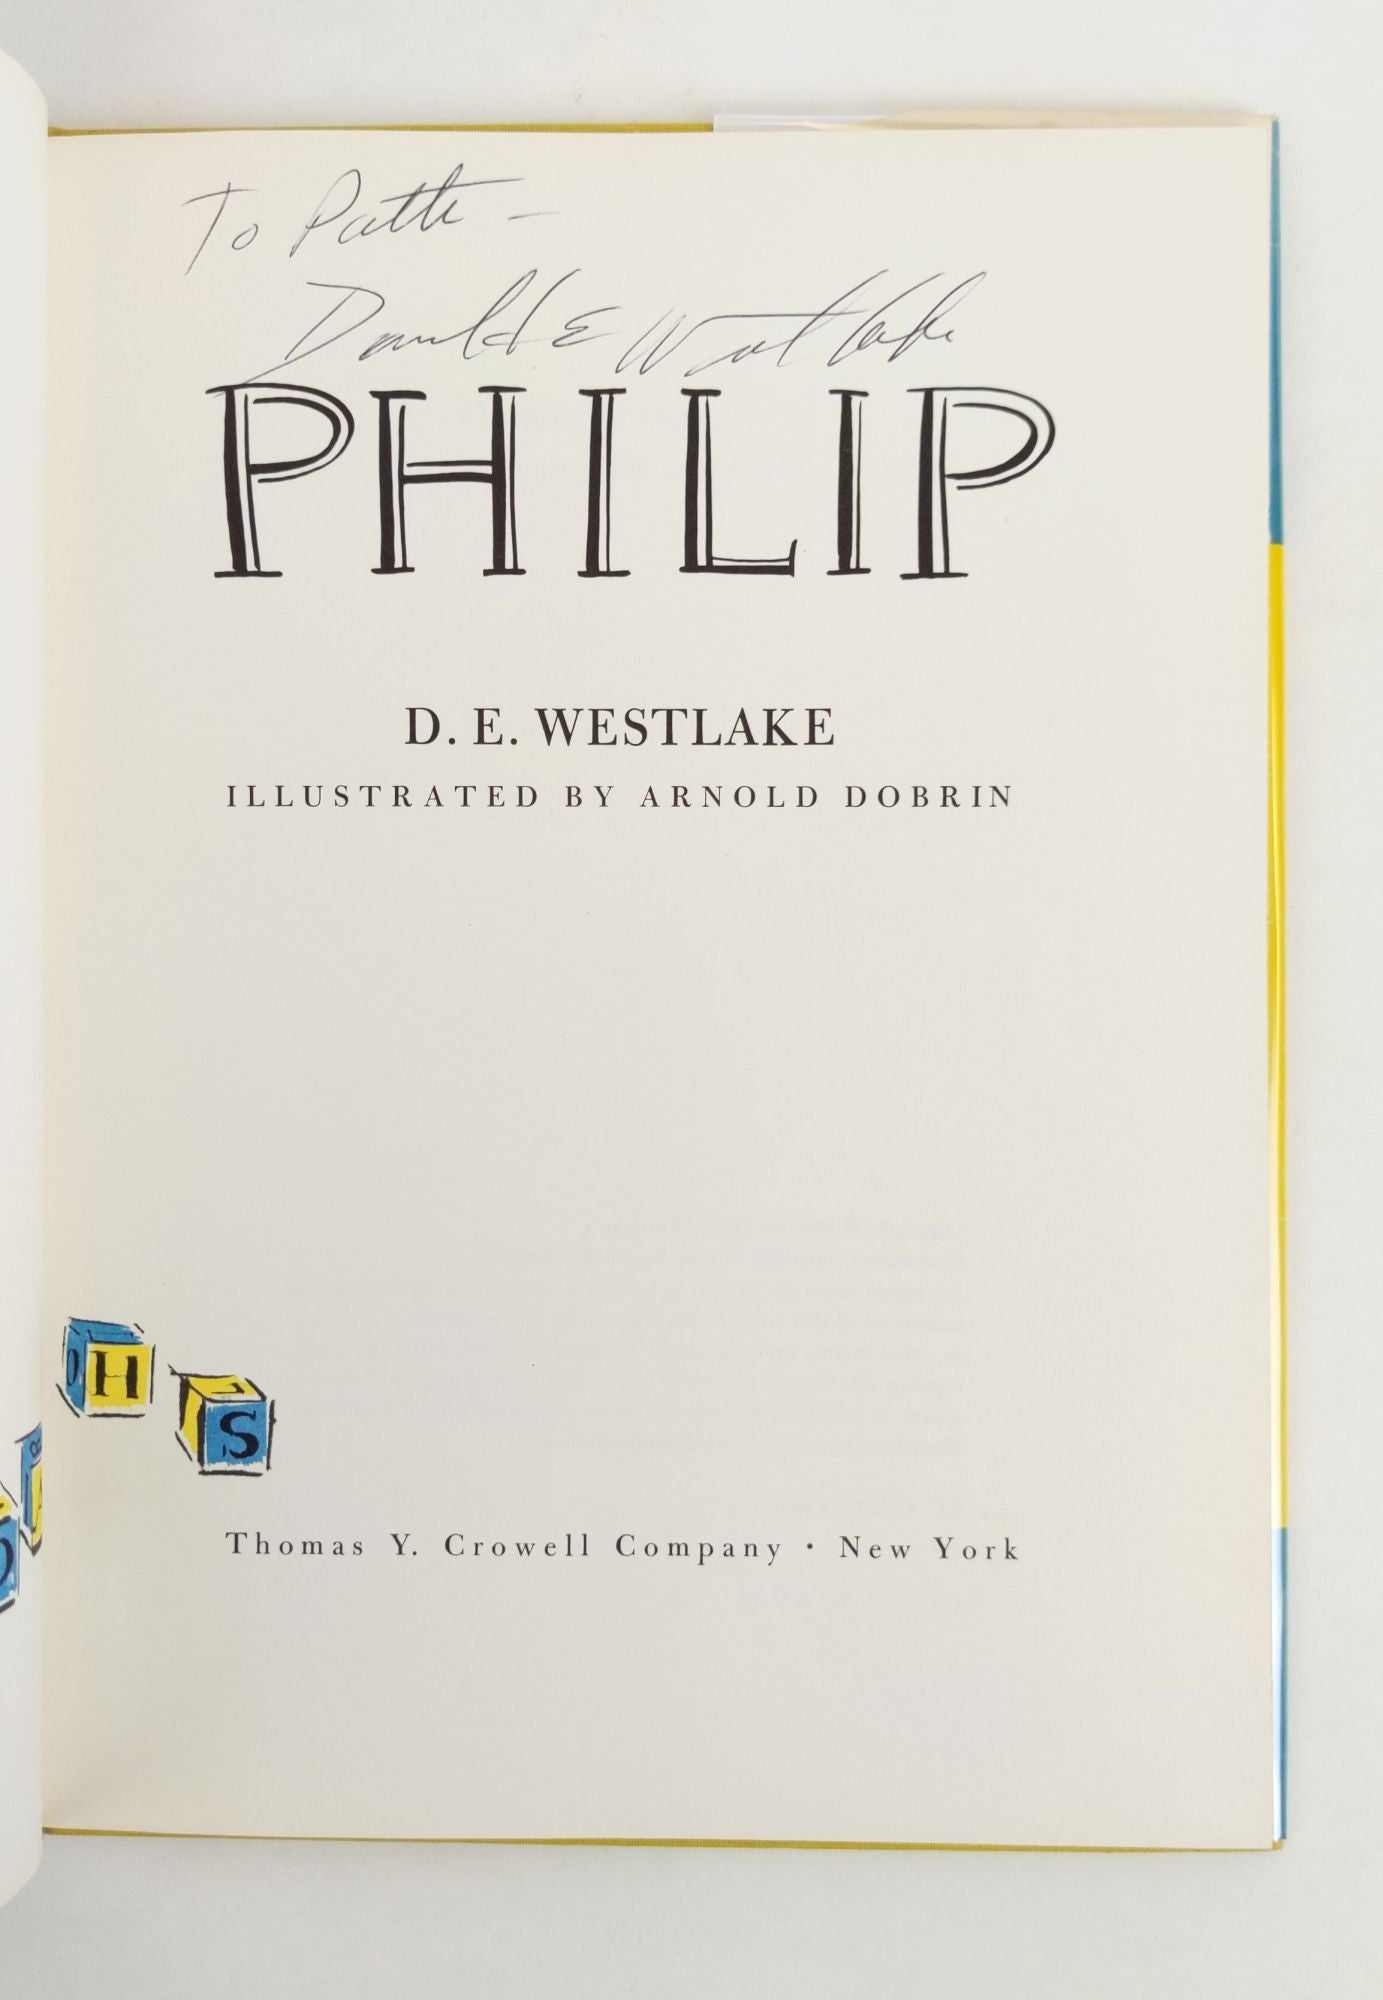 Product Image for PHILIP [Signed]